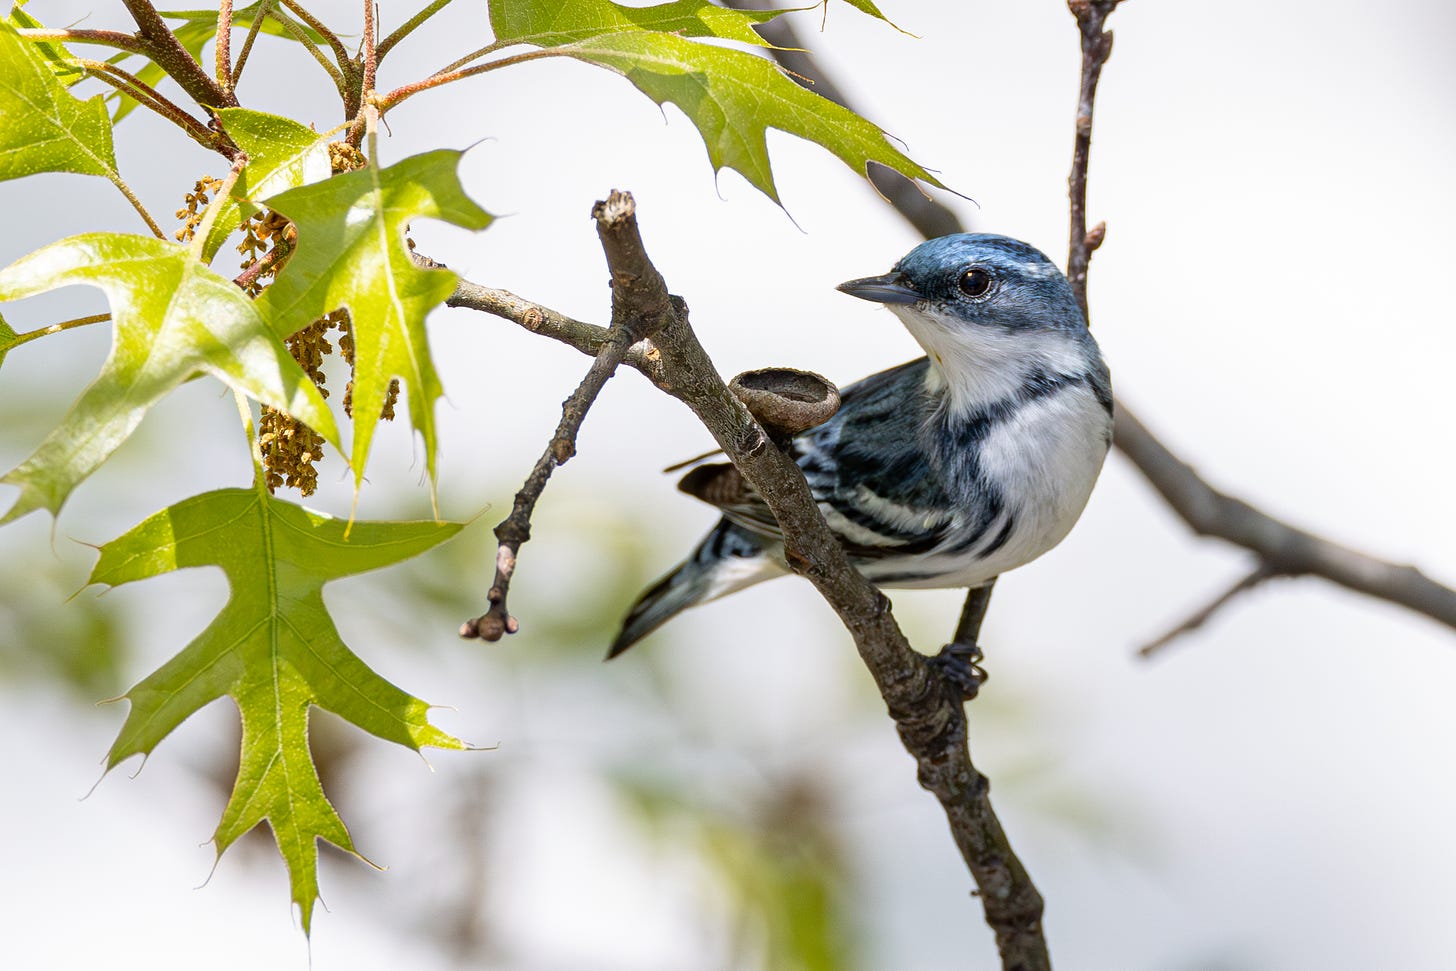 a songbird with a pointy black beak, white belly, and sky blue back/necklace with streaks on its flanks. it is perched on a twig, facing image right looking over its shoulder. there are oak leaves and catkins to image left. 